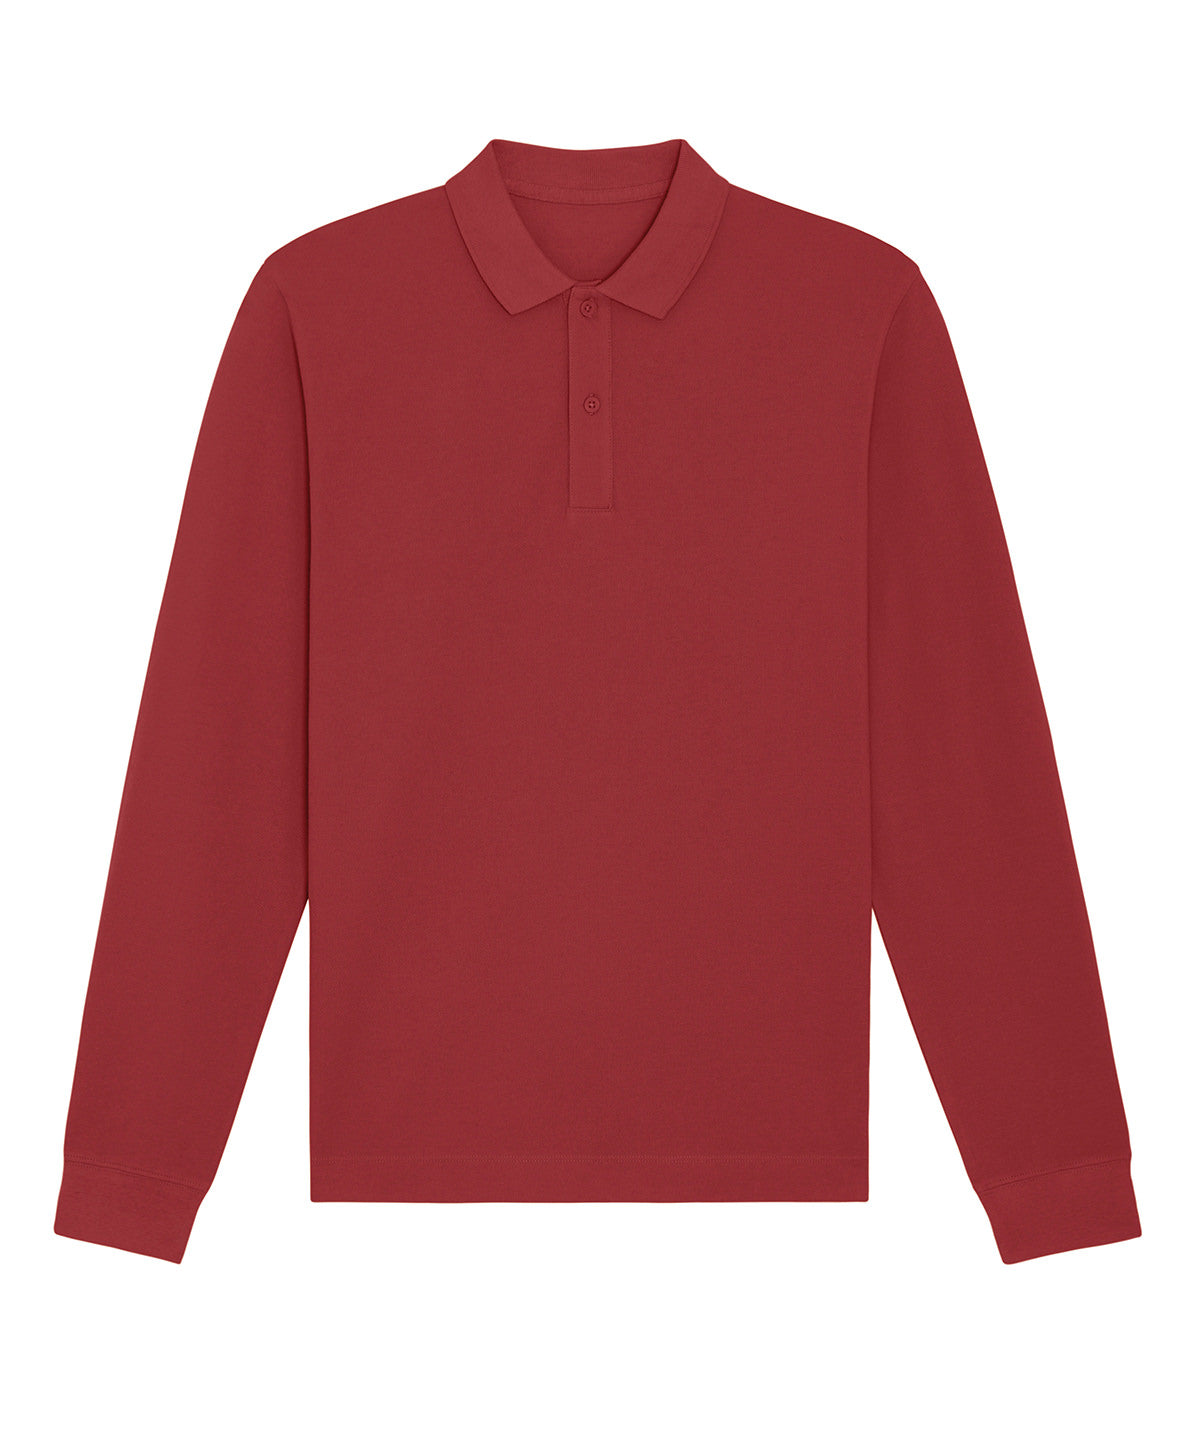 Stanley/Stella Prepster Long Sleeve Unisex Polo Red Earth